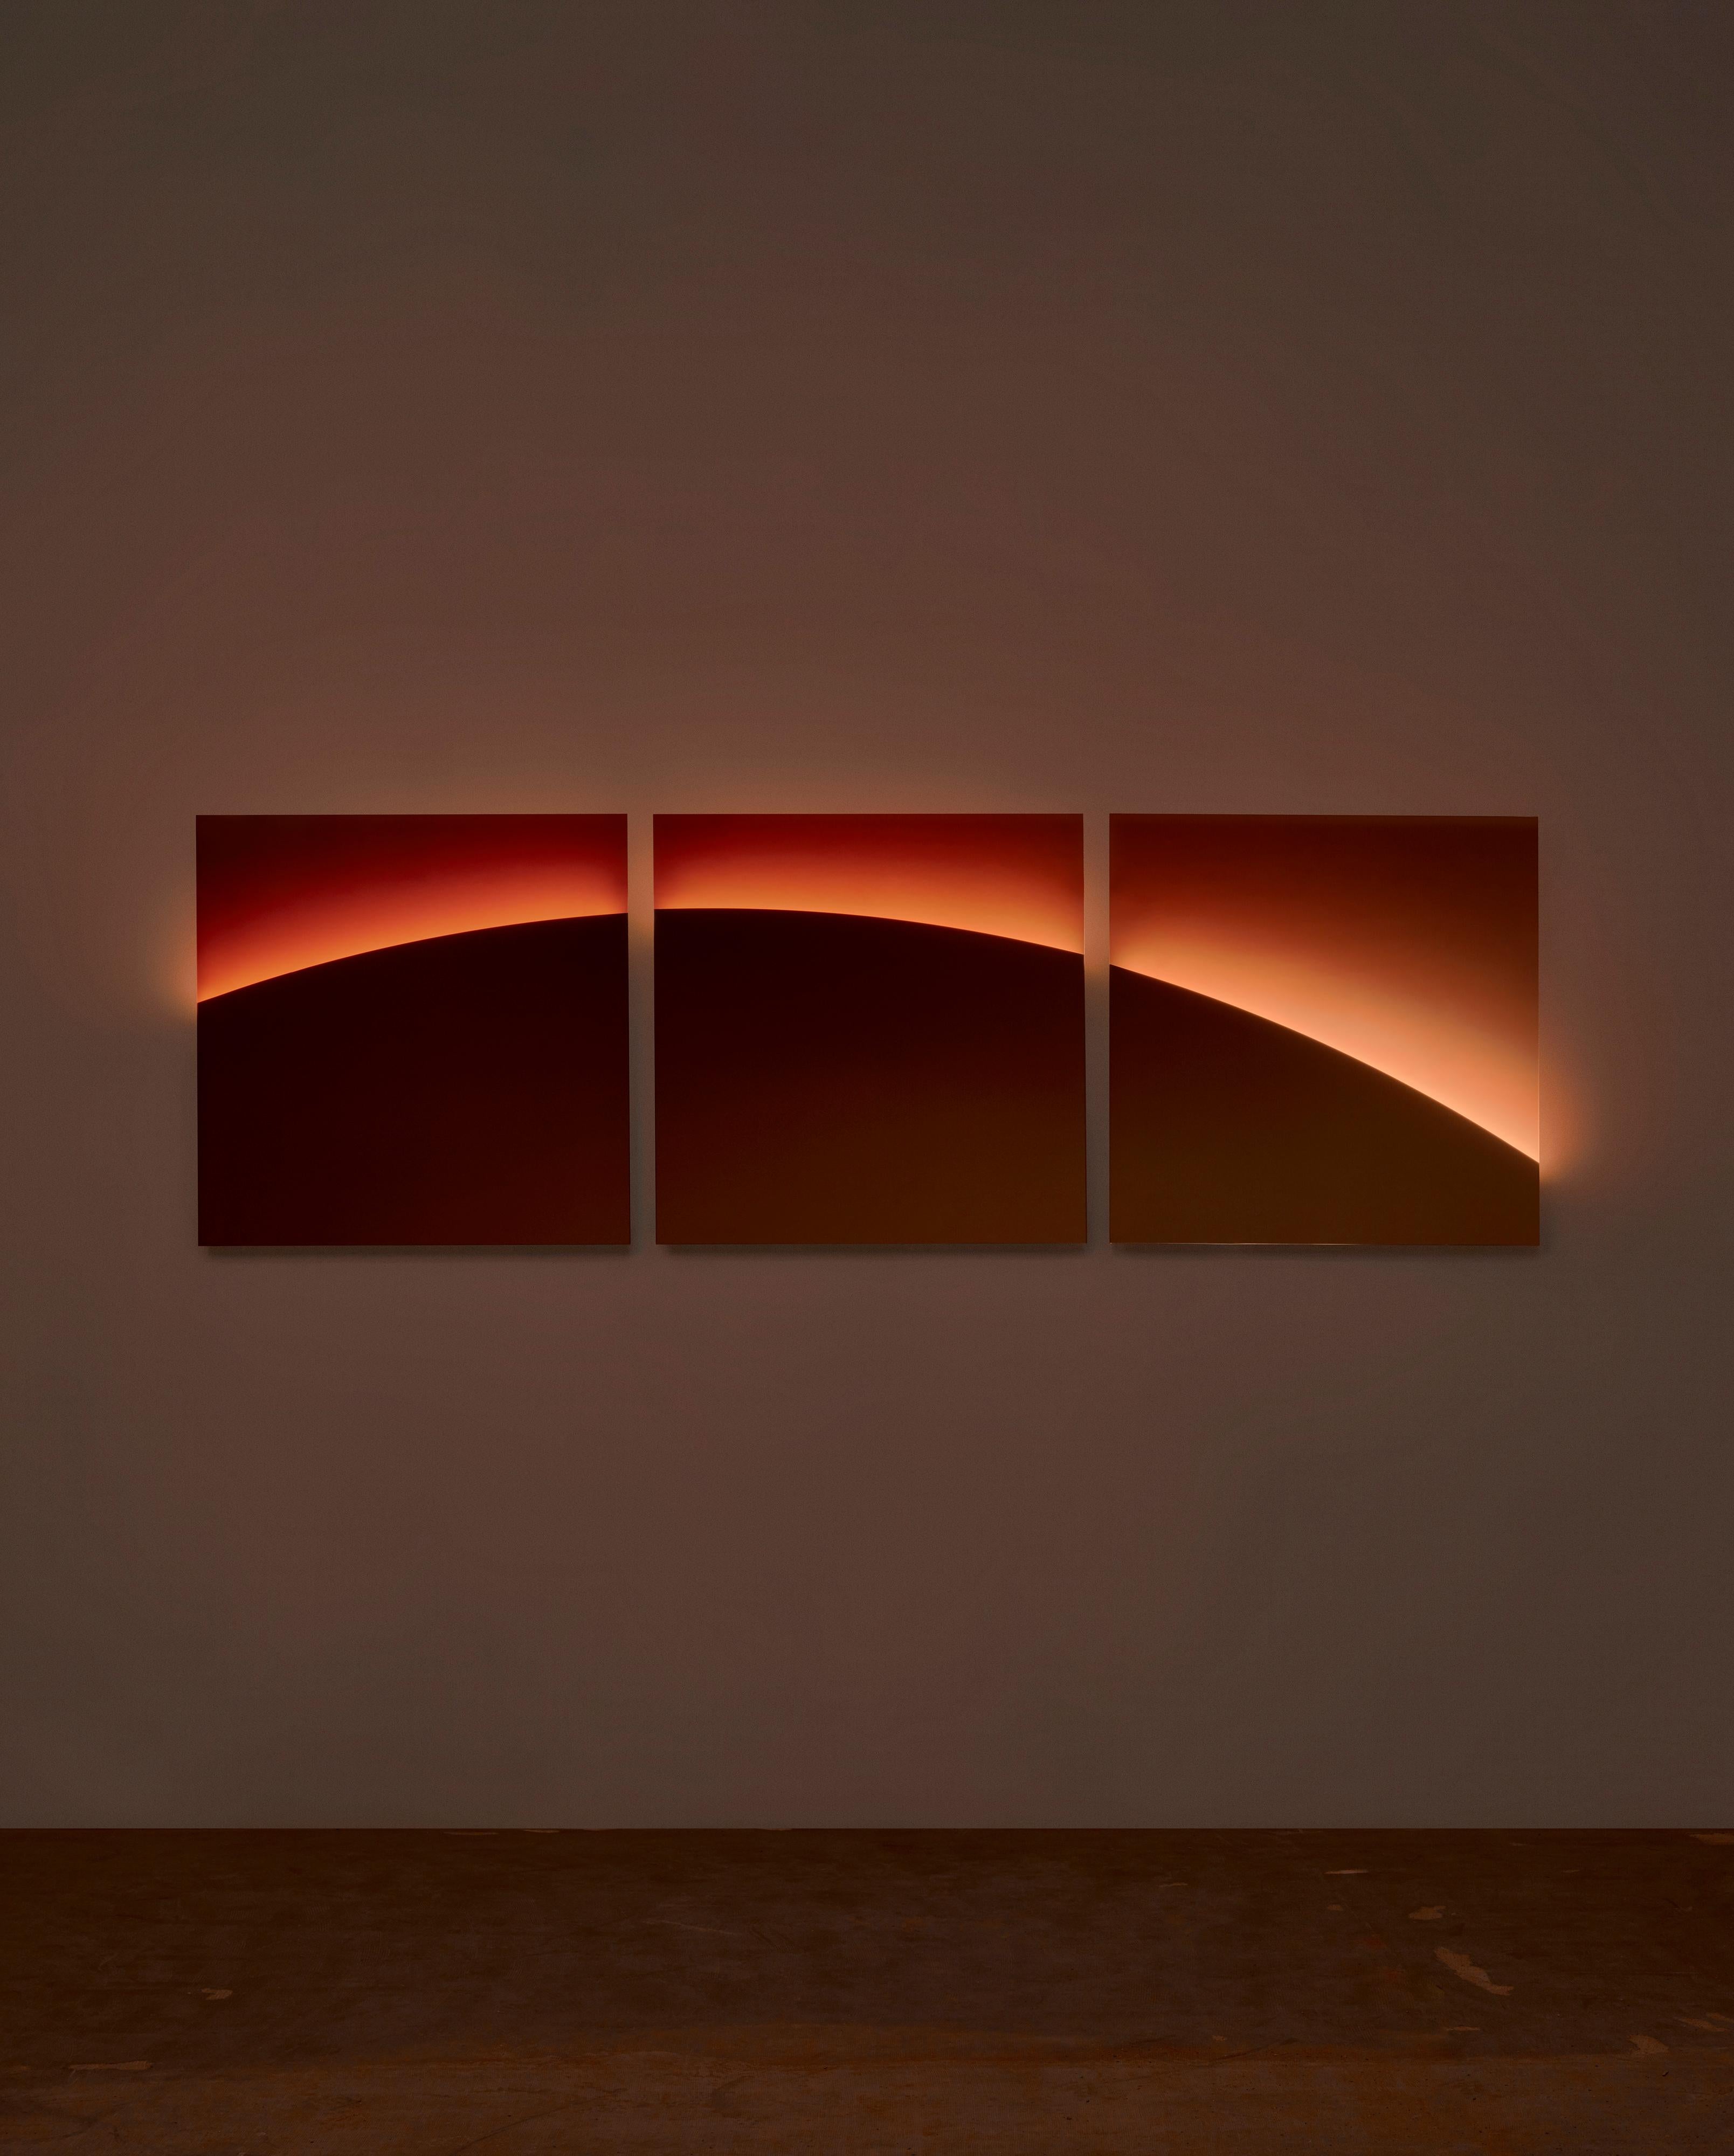 Mirage Tryptich mirror light

Warm sun on the desert sand, the shimmering lights of Dubai - Sabine Marcelis' works capture the energy of nature and the vibrancy of urban life. As the shapes and colors shift and merge with their surroundings, these